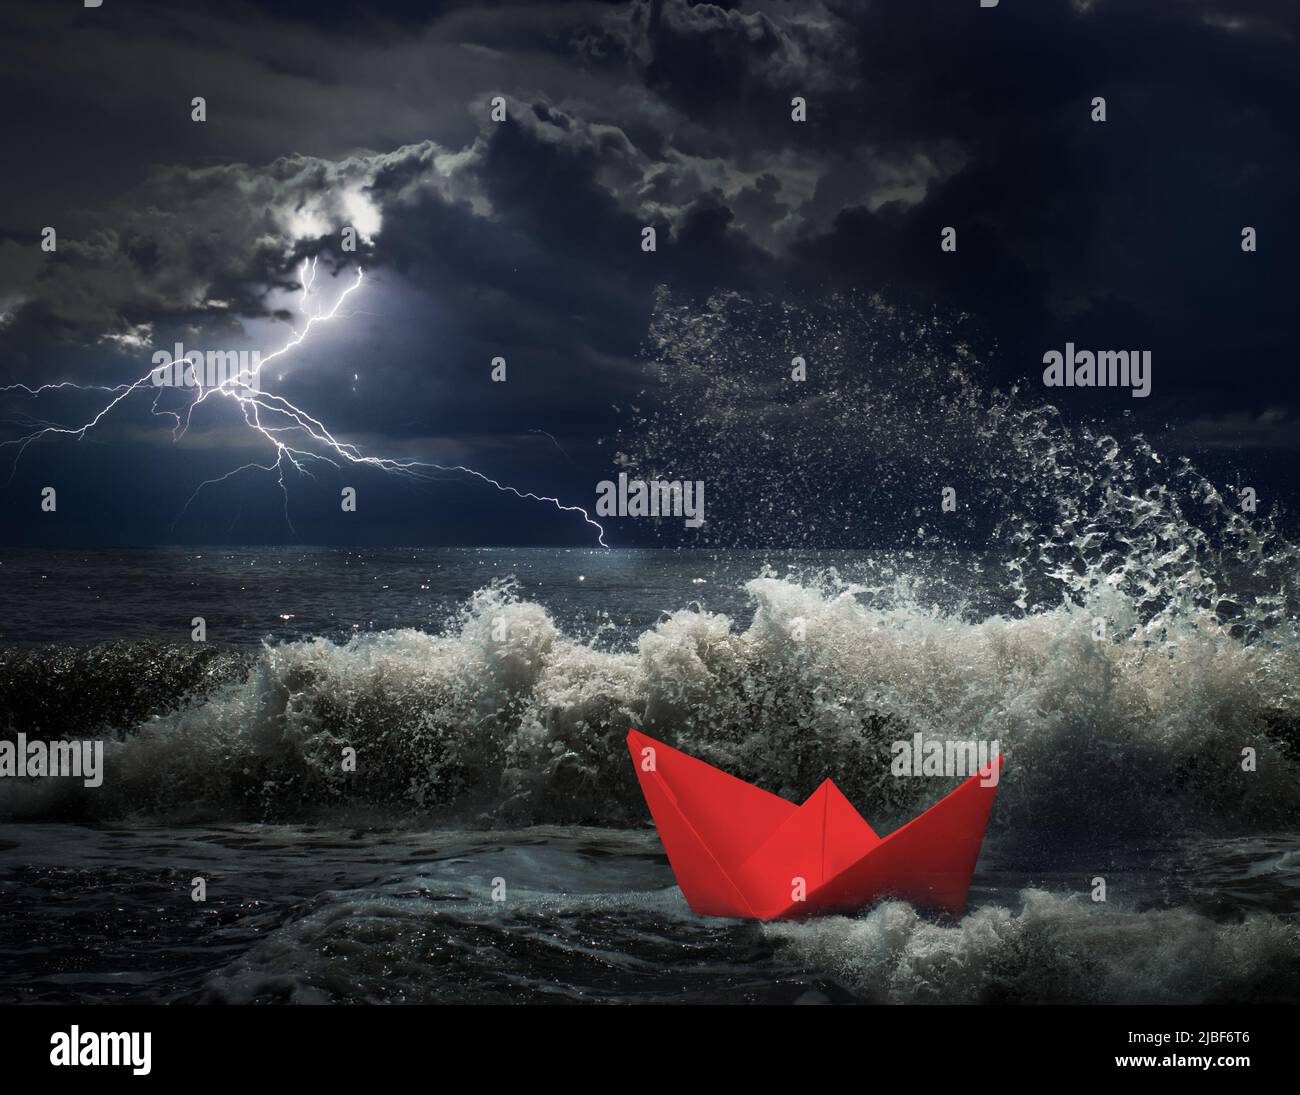 Red paper ship in storm concept Stock Photo